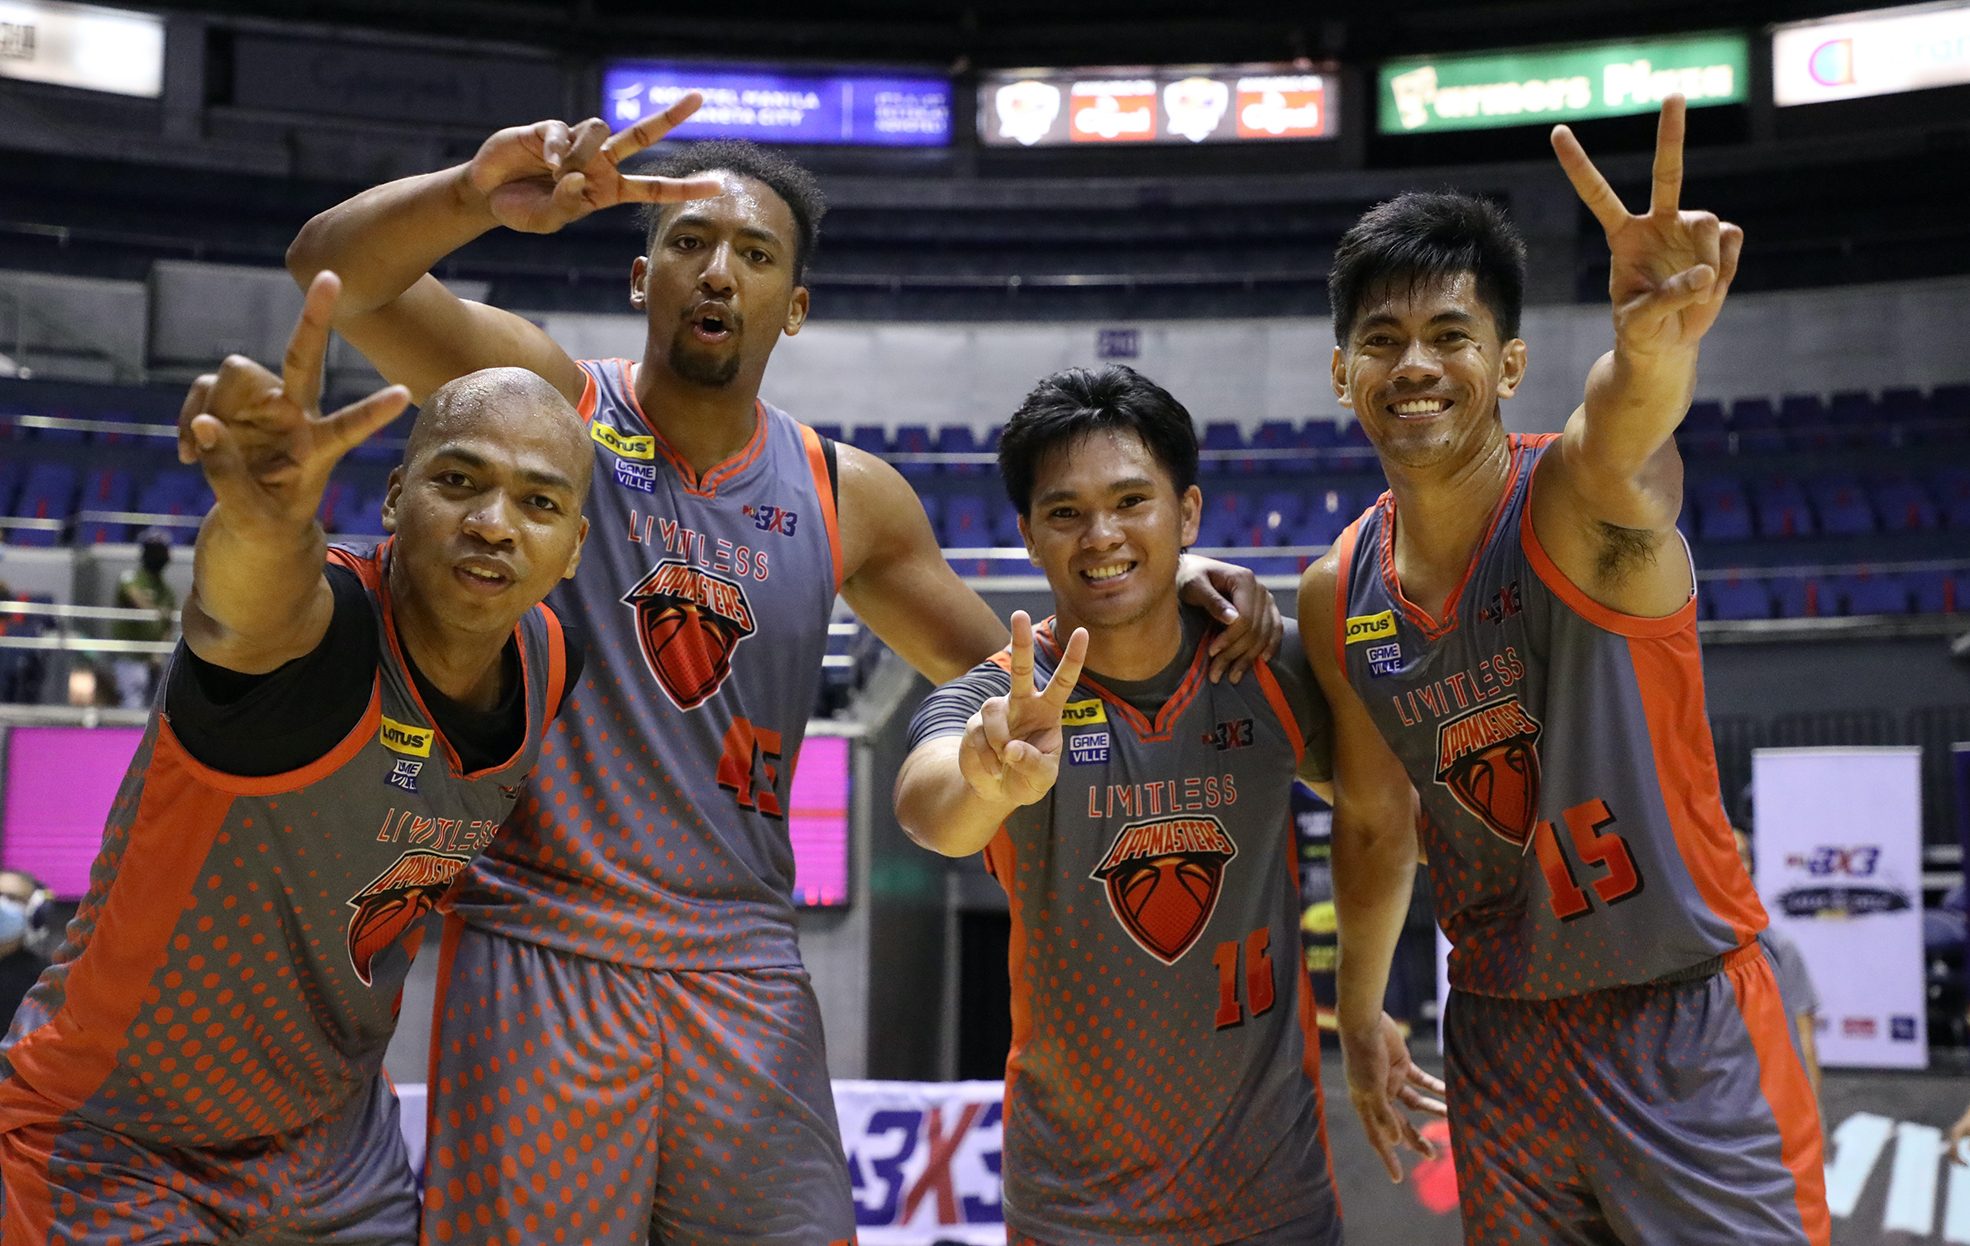 Limitless repeats as PBA 3×3 champions after edging TNT in Leg 6 finals